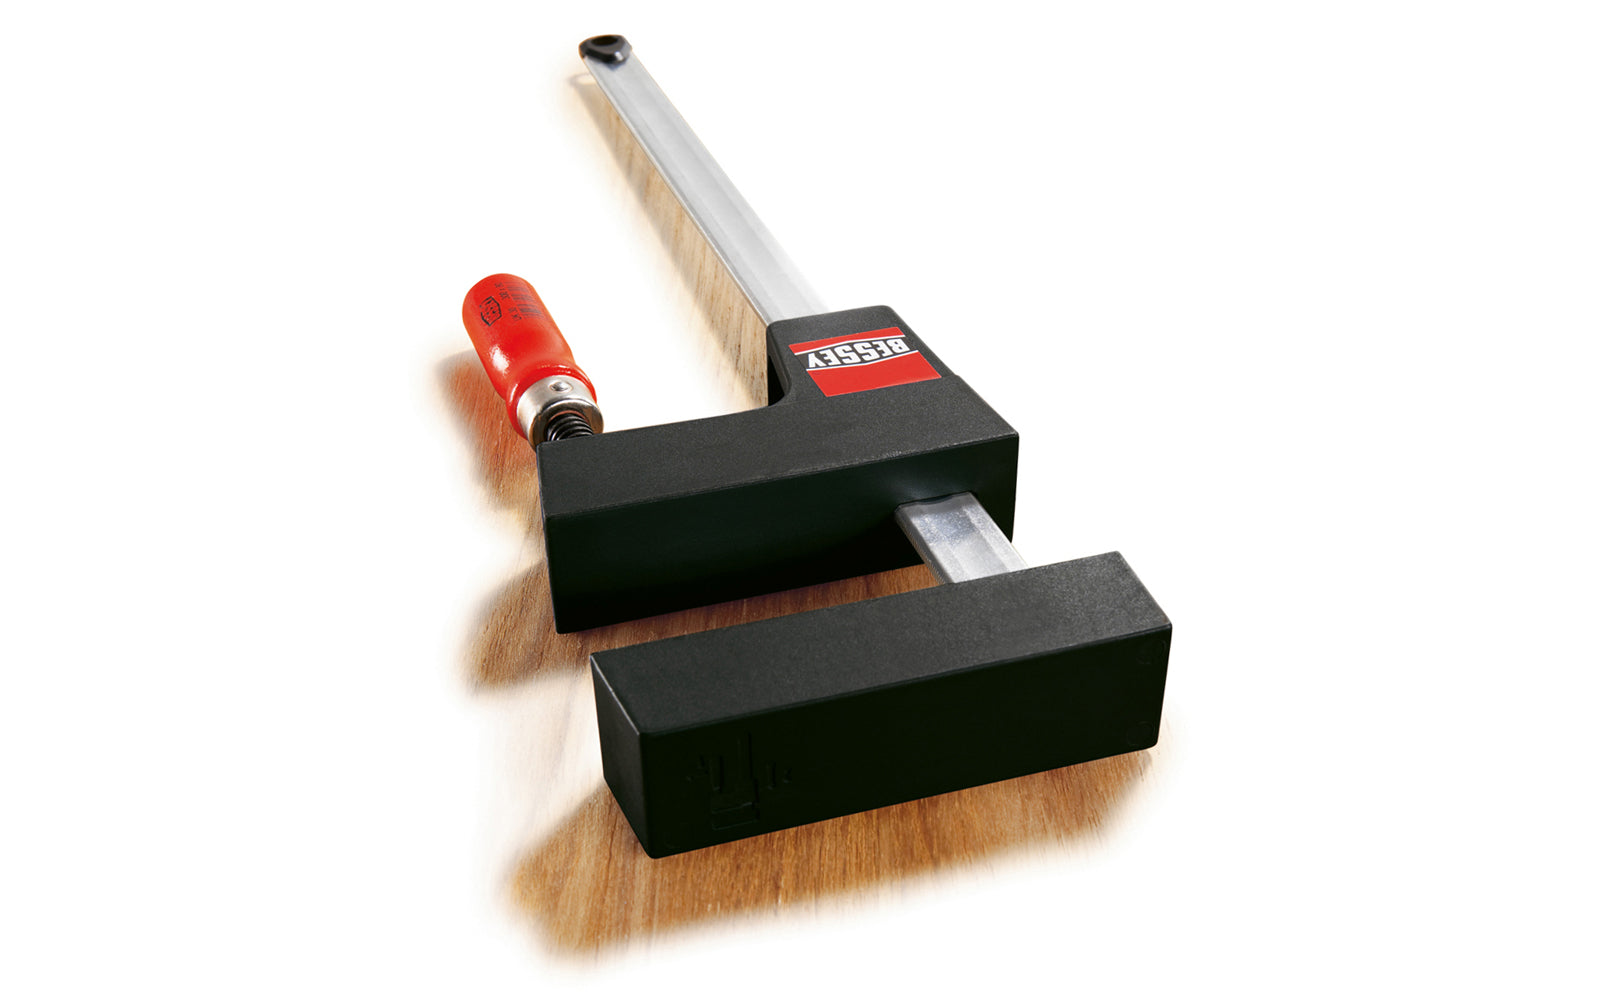 Bessey "UniKlamp" is a light duty universal clamp/spreader for bench top projects with a lighter frame & rail. Gentle touch jaws distribute the clamping pressure along the entire length of the rail & are ideal for sensitive work pieces & right angles. 12" max opening - 3-1/8" throat depth - Model UK3.012 - Wood handles - 091162006696